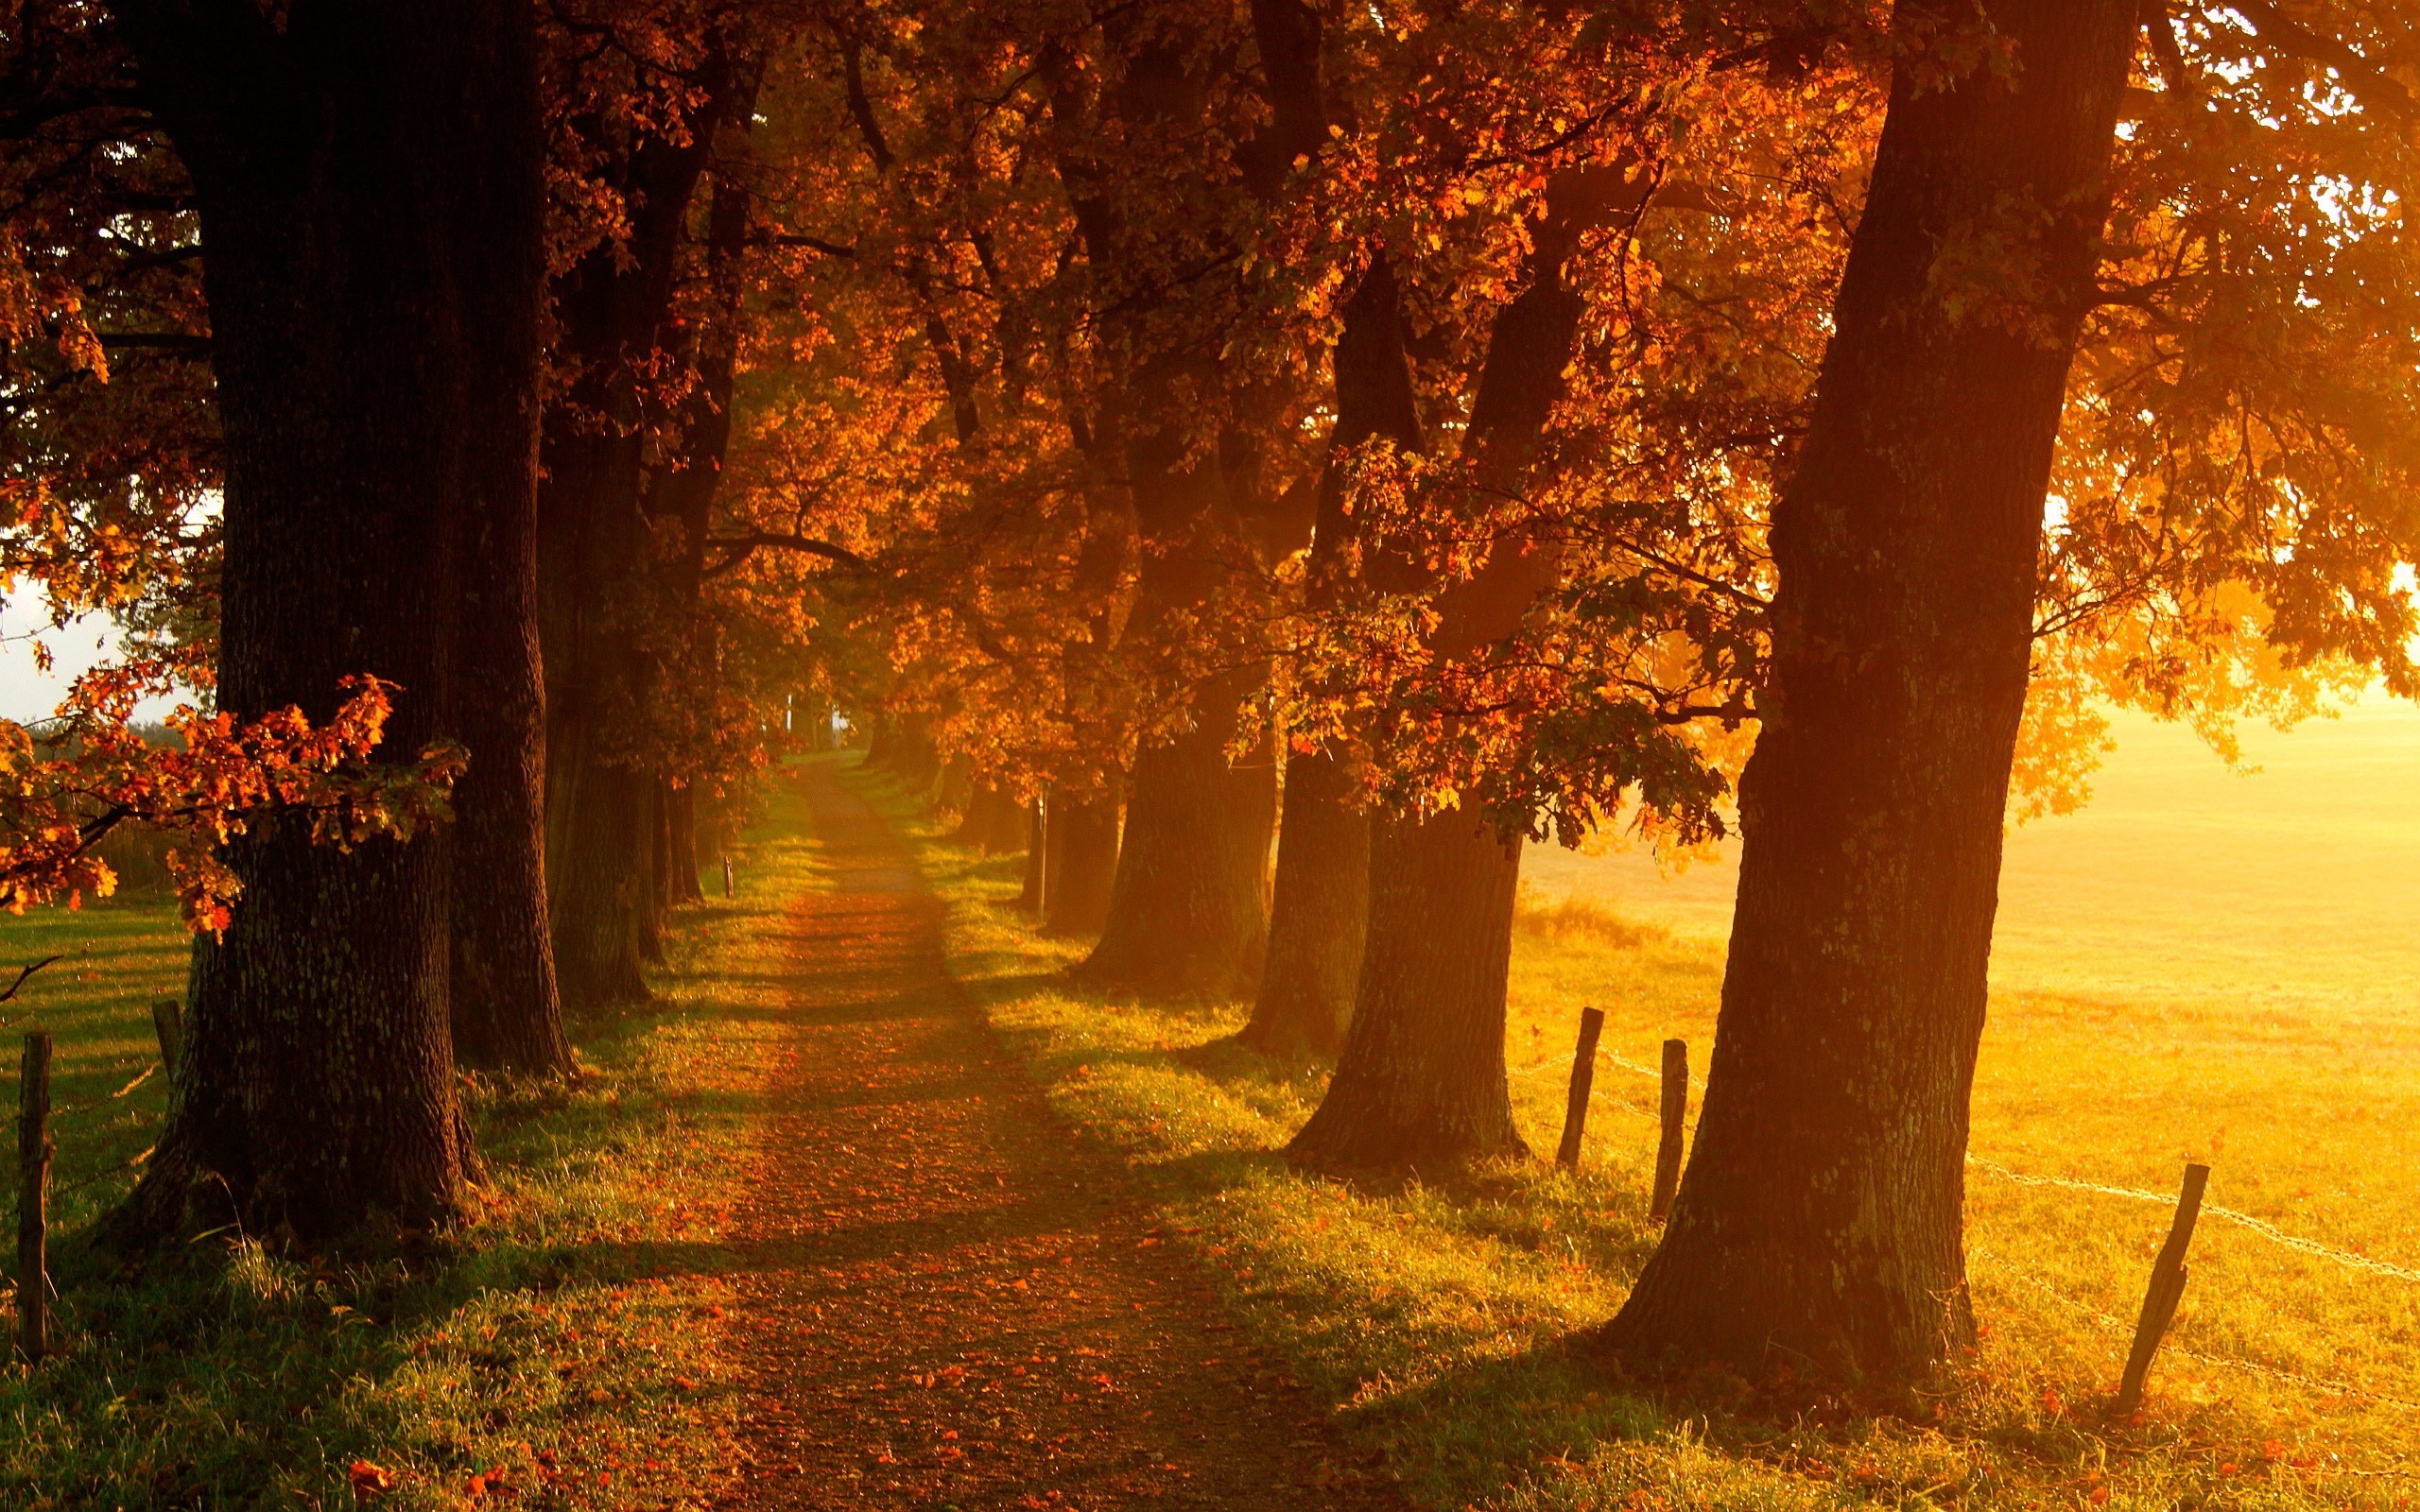 2560x1600 Kerr Turner - Free Awesome autumn scenery wallpaper - 2560 x 1600 px